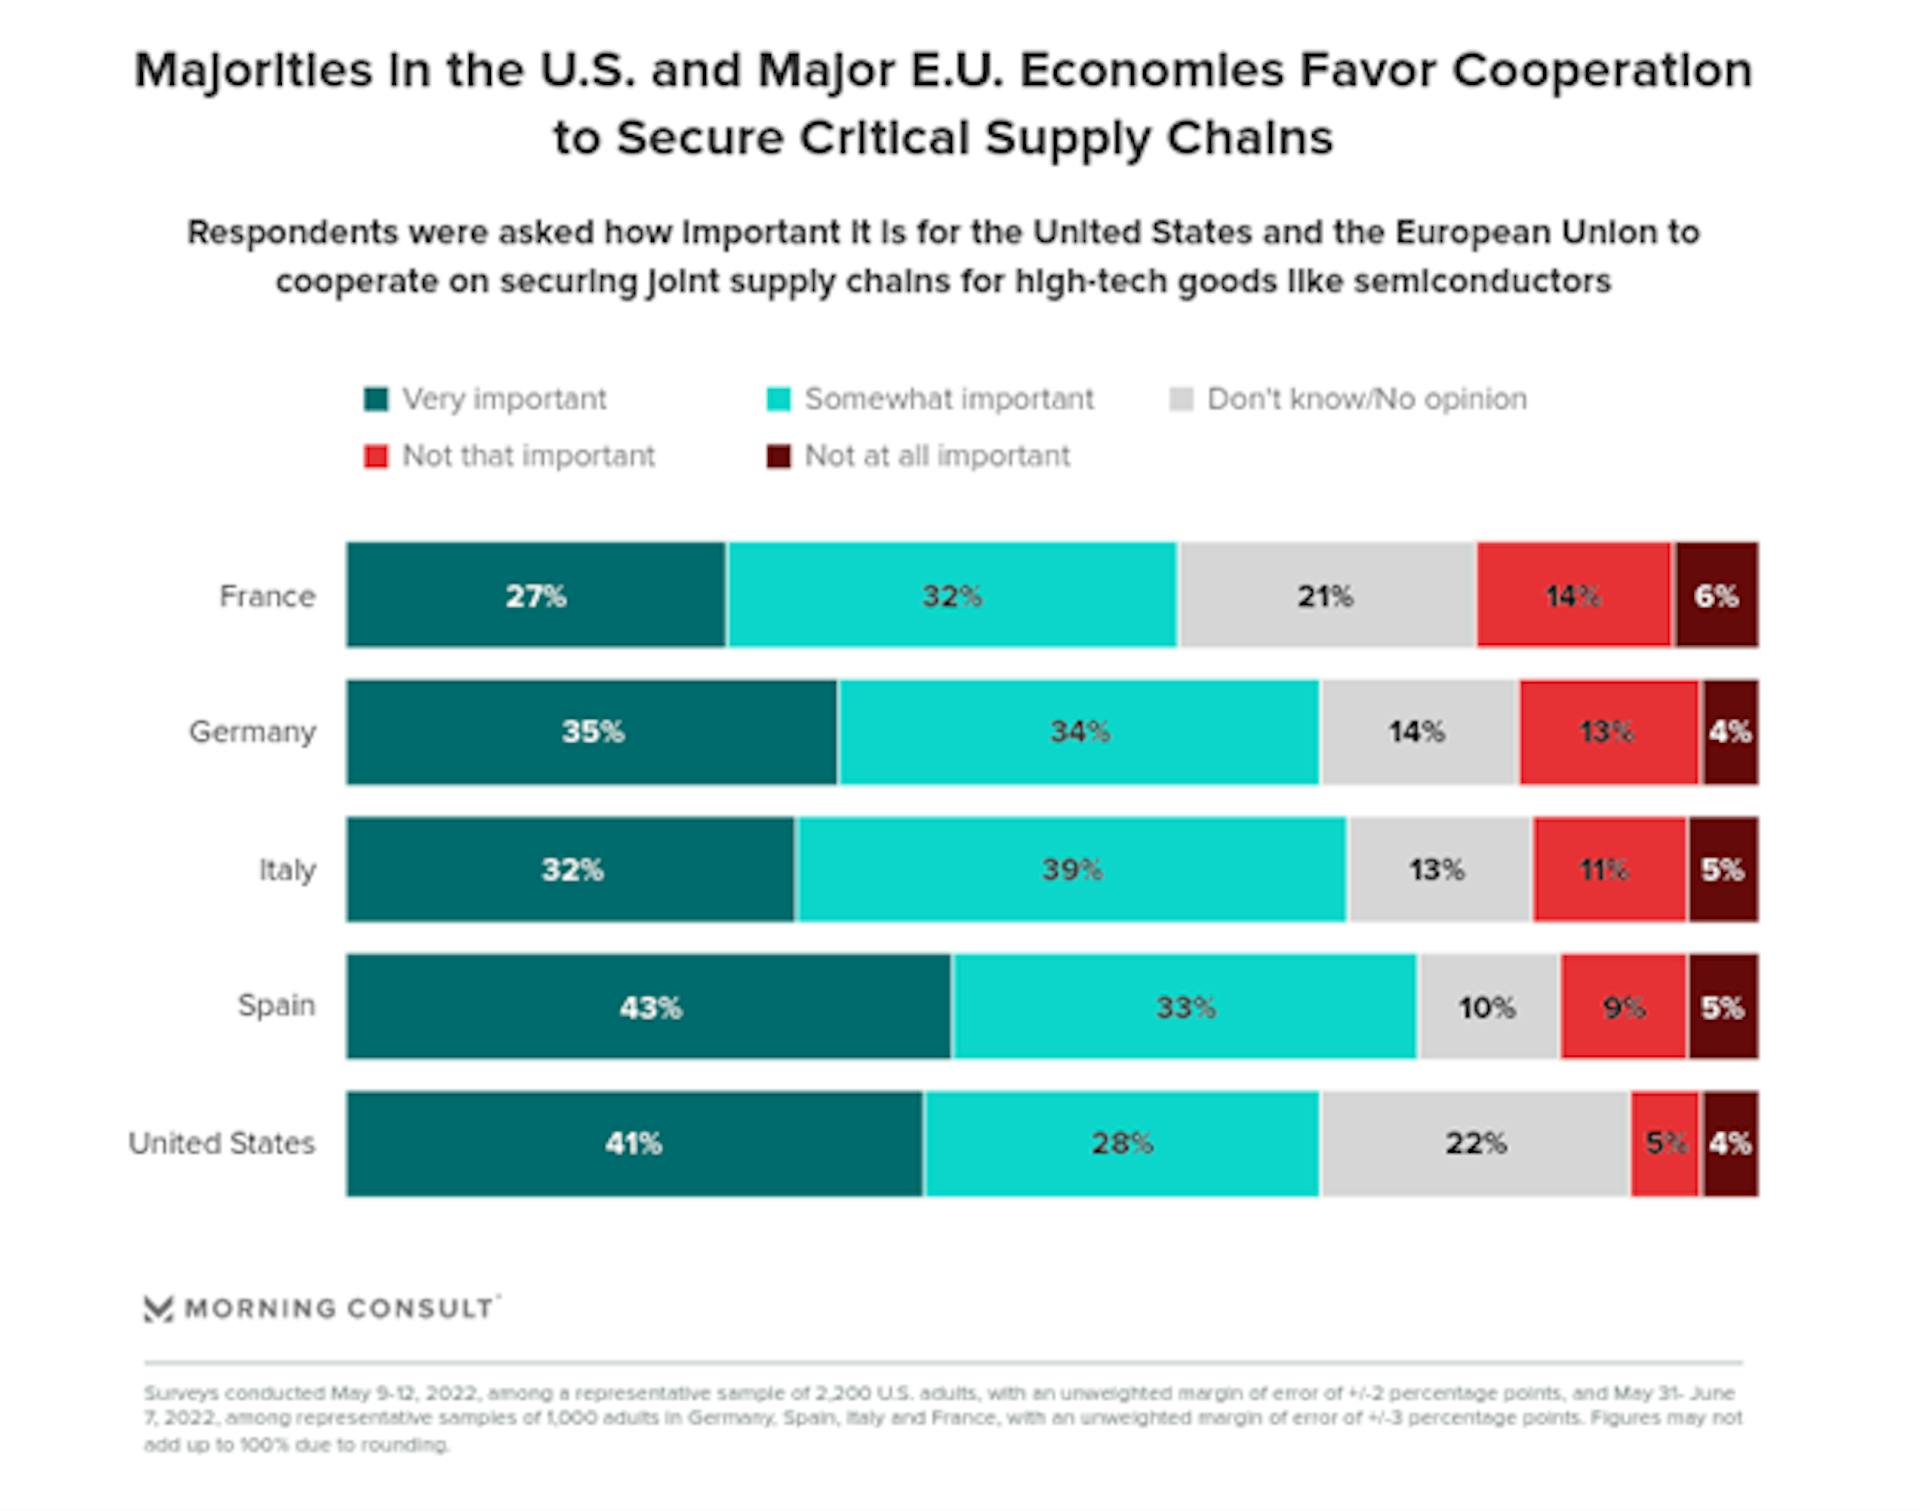 Friendshoring to Secure Global Supply Chains? Image Source: Morning Consult